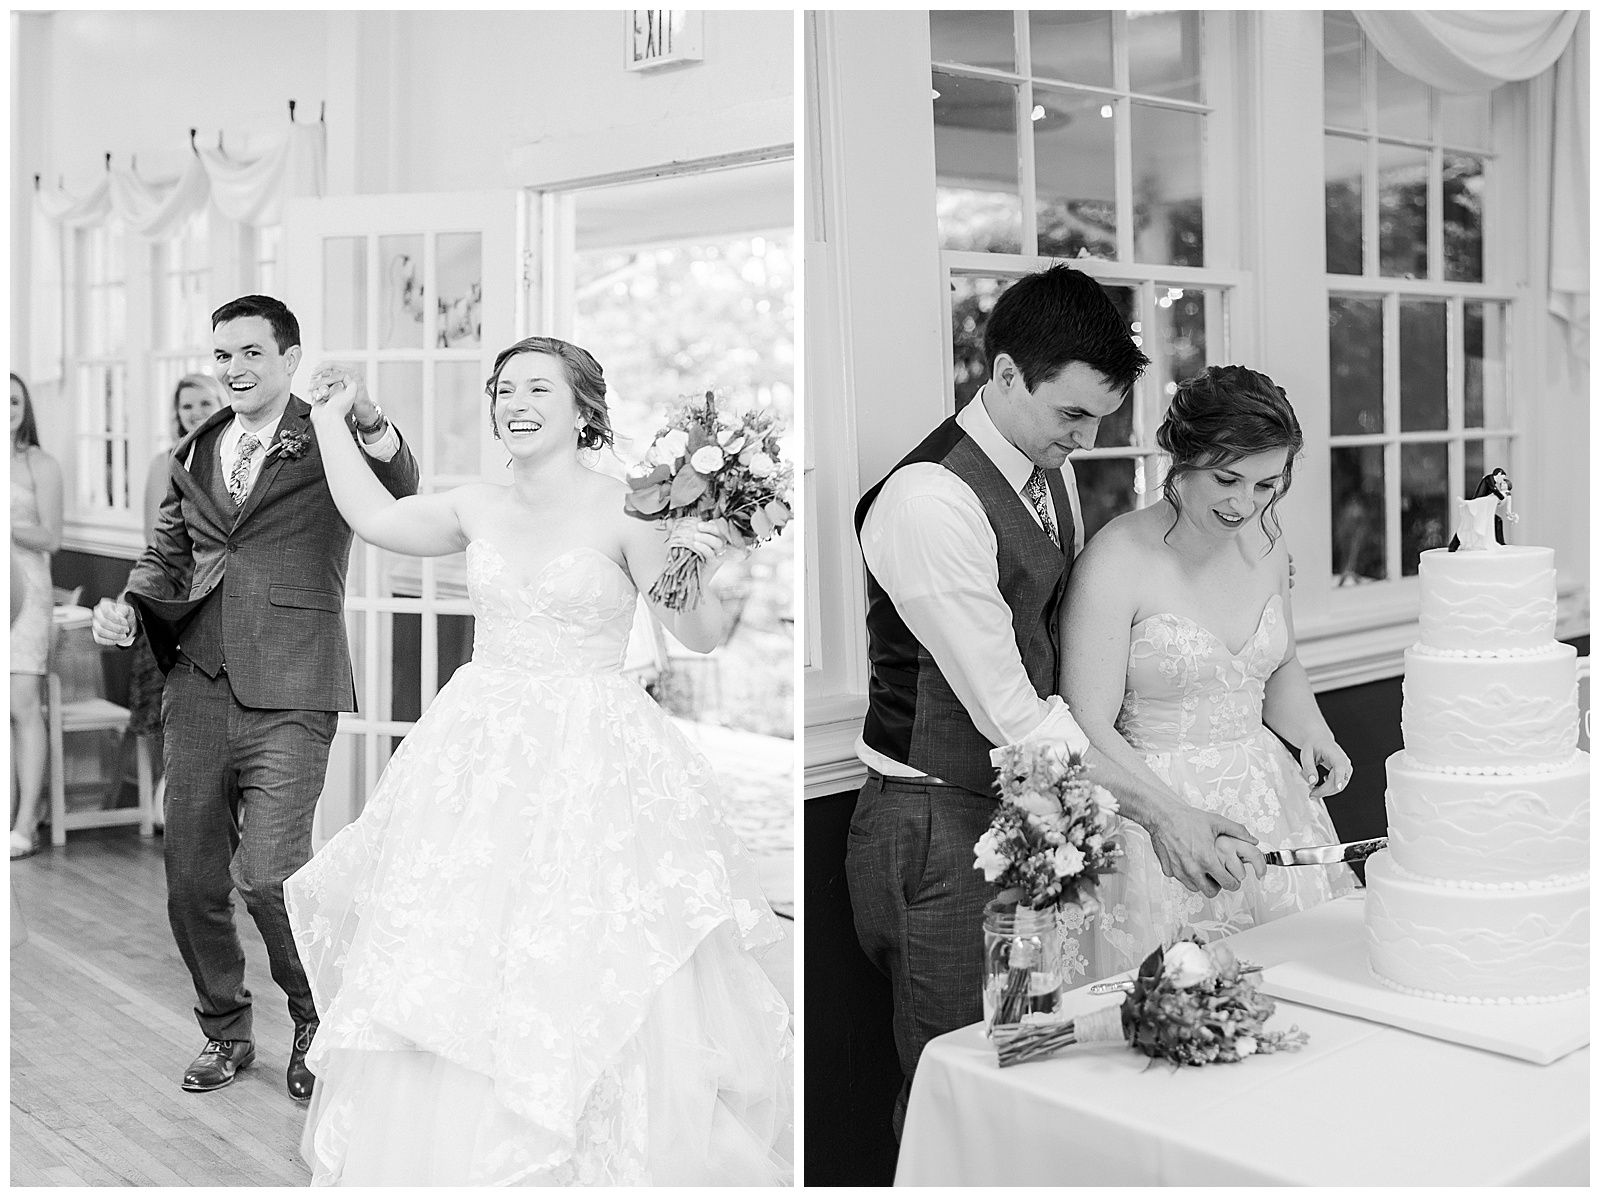 Bride and groom arrive at reception and cut the cake at Outdoorsy Summer Wedding at North Carolina Lakehouse in the Mountains | check out the full wedding at KevynDixonPhoto.com